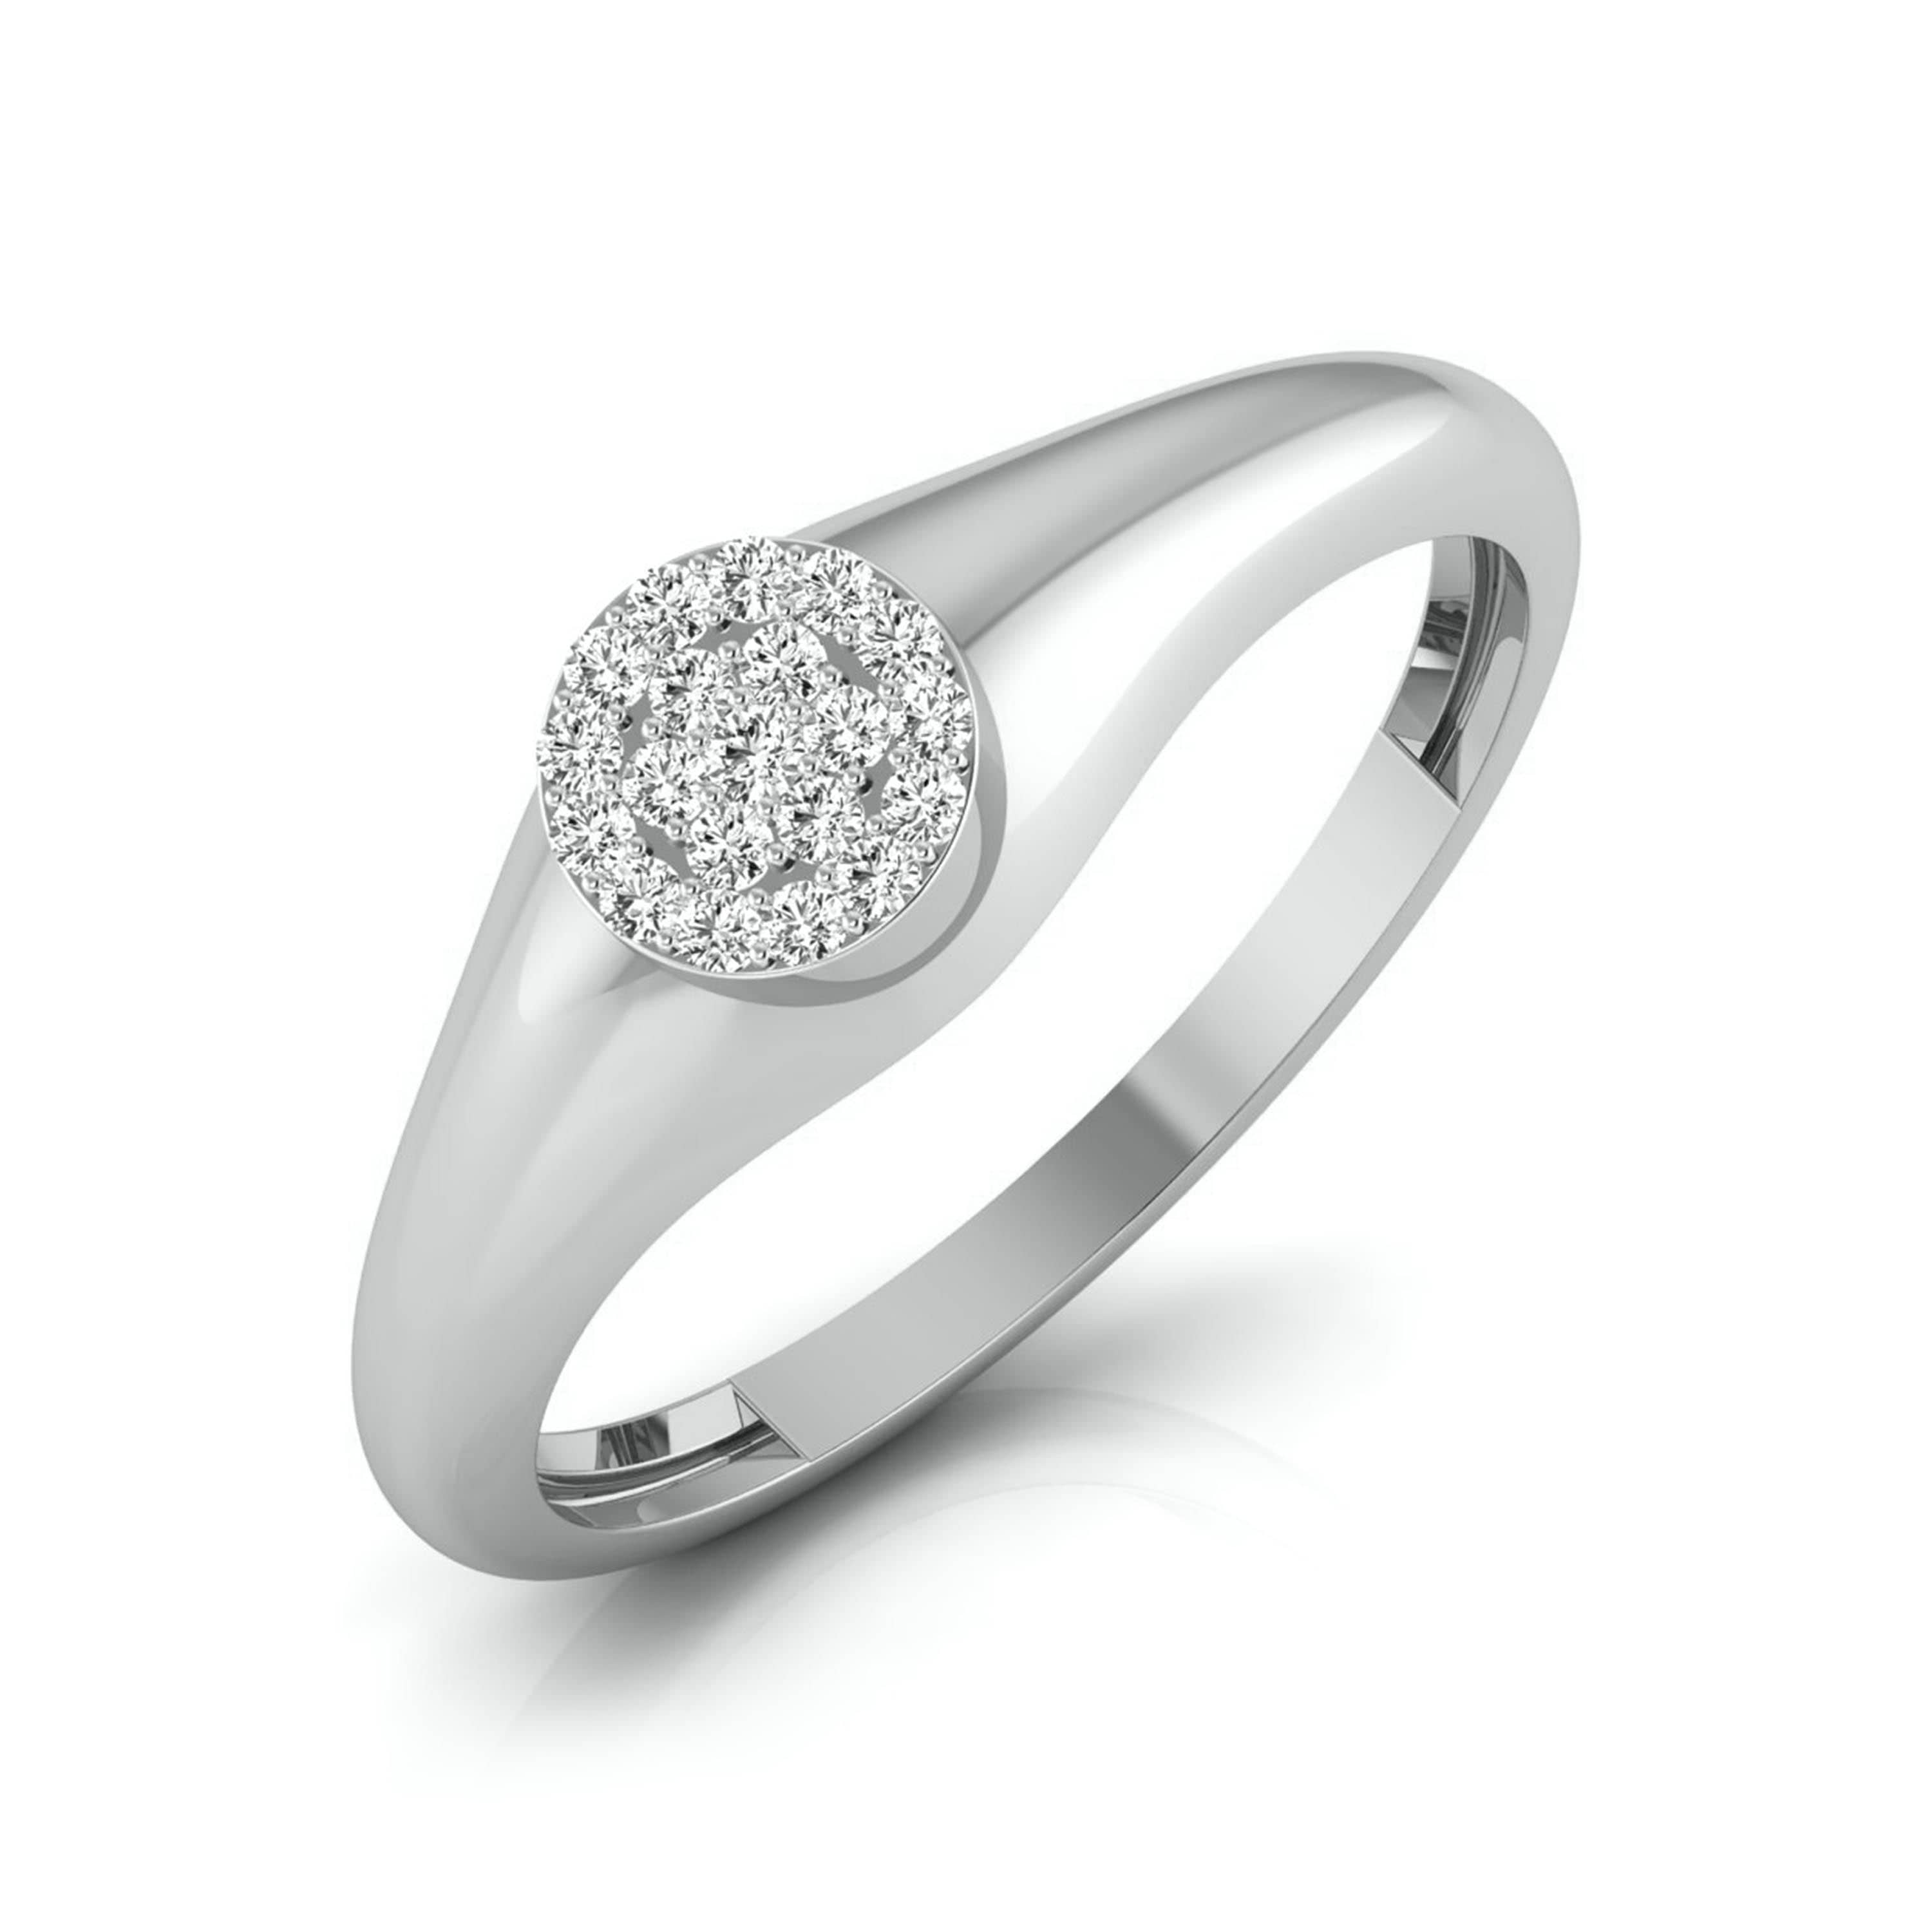 Shop Diamond Engagement Rings And Settings | Brilliance